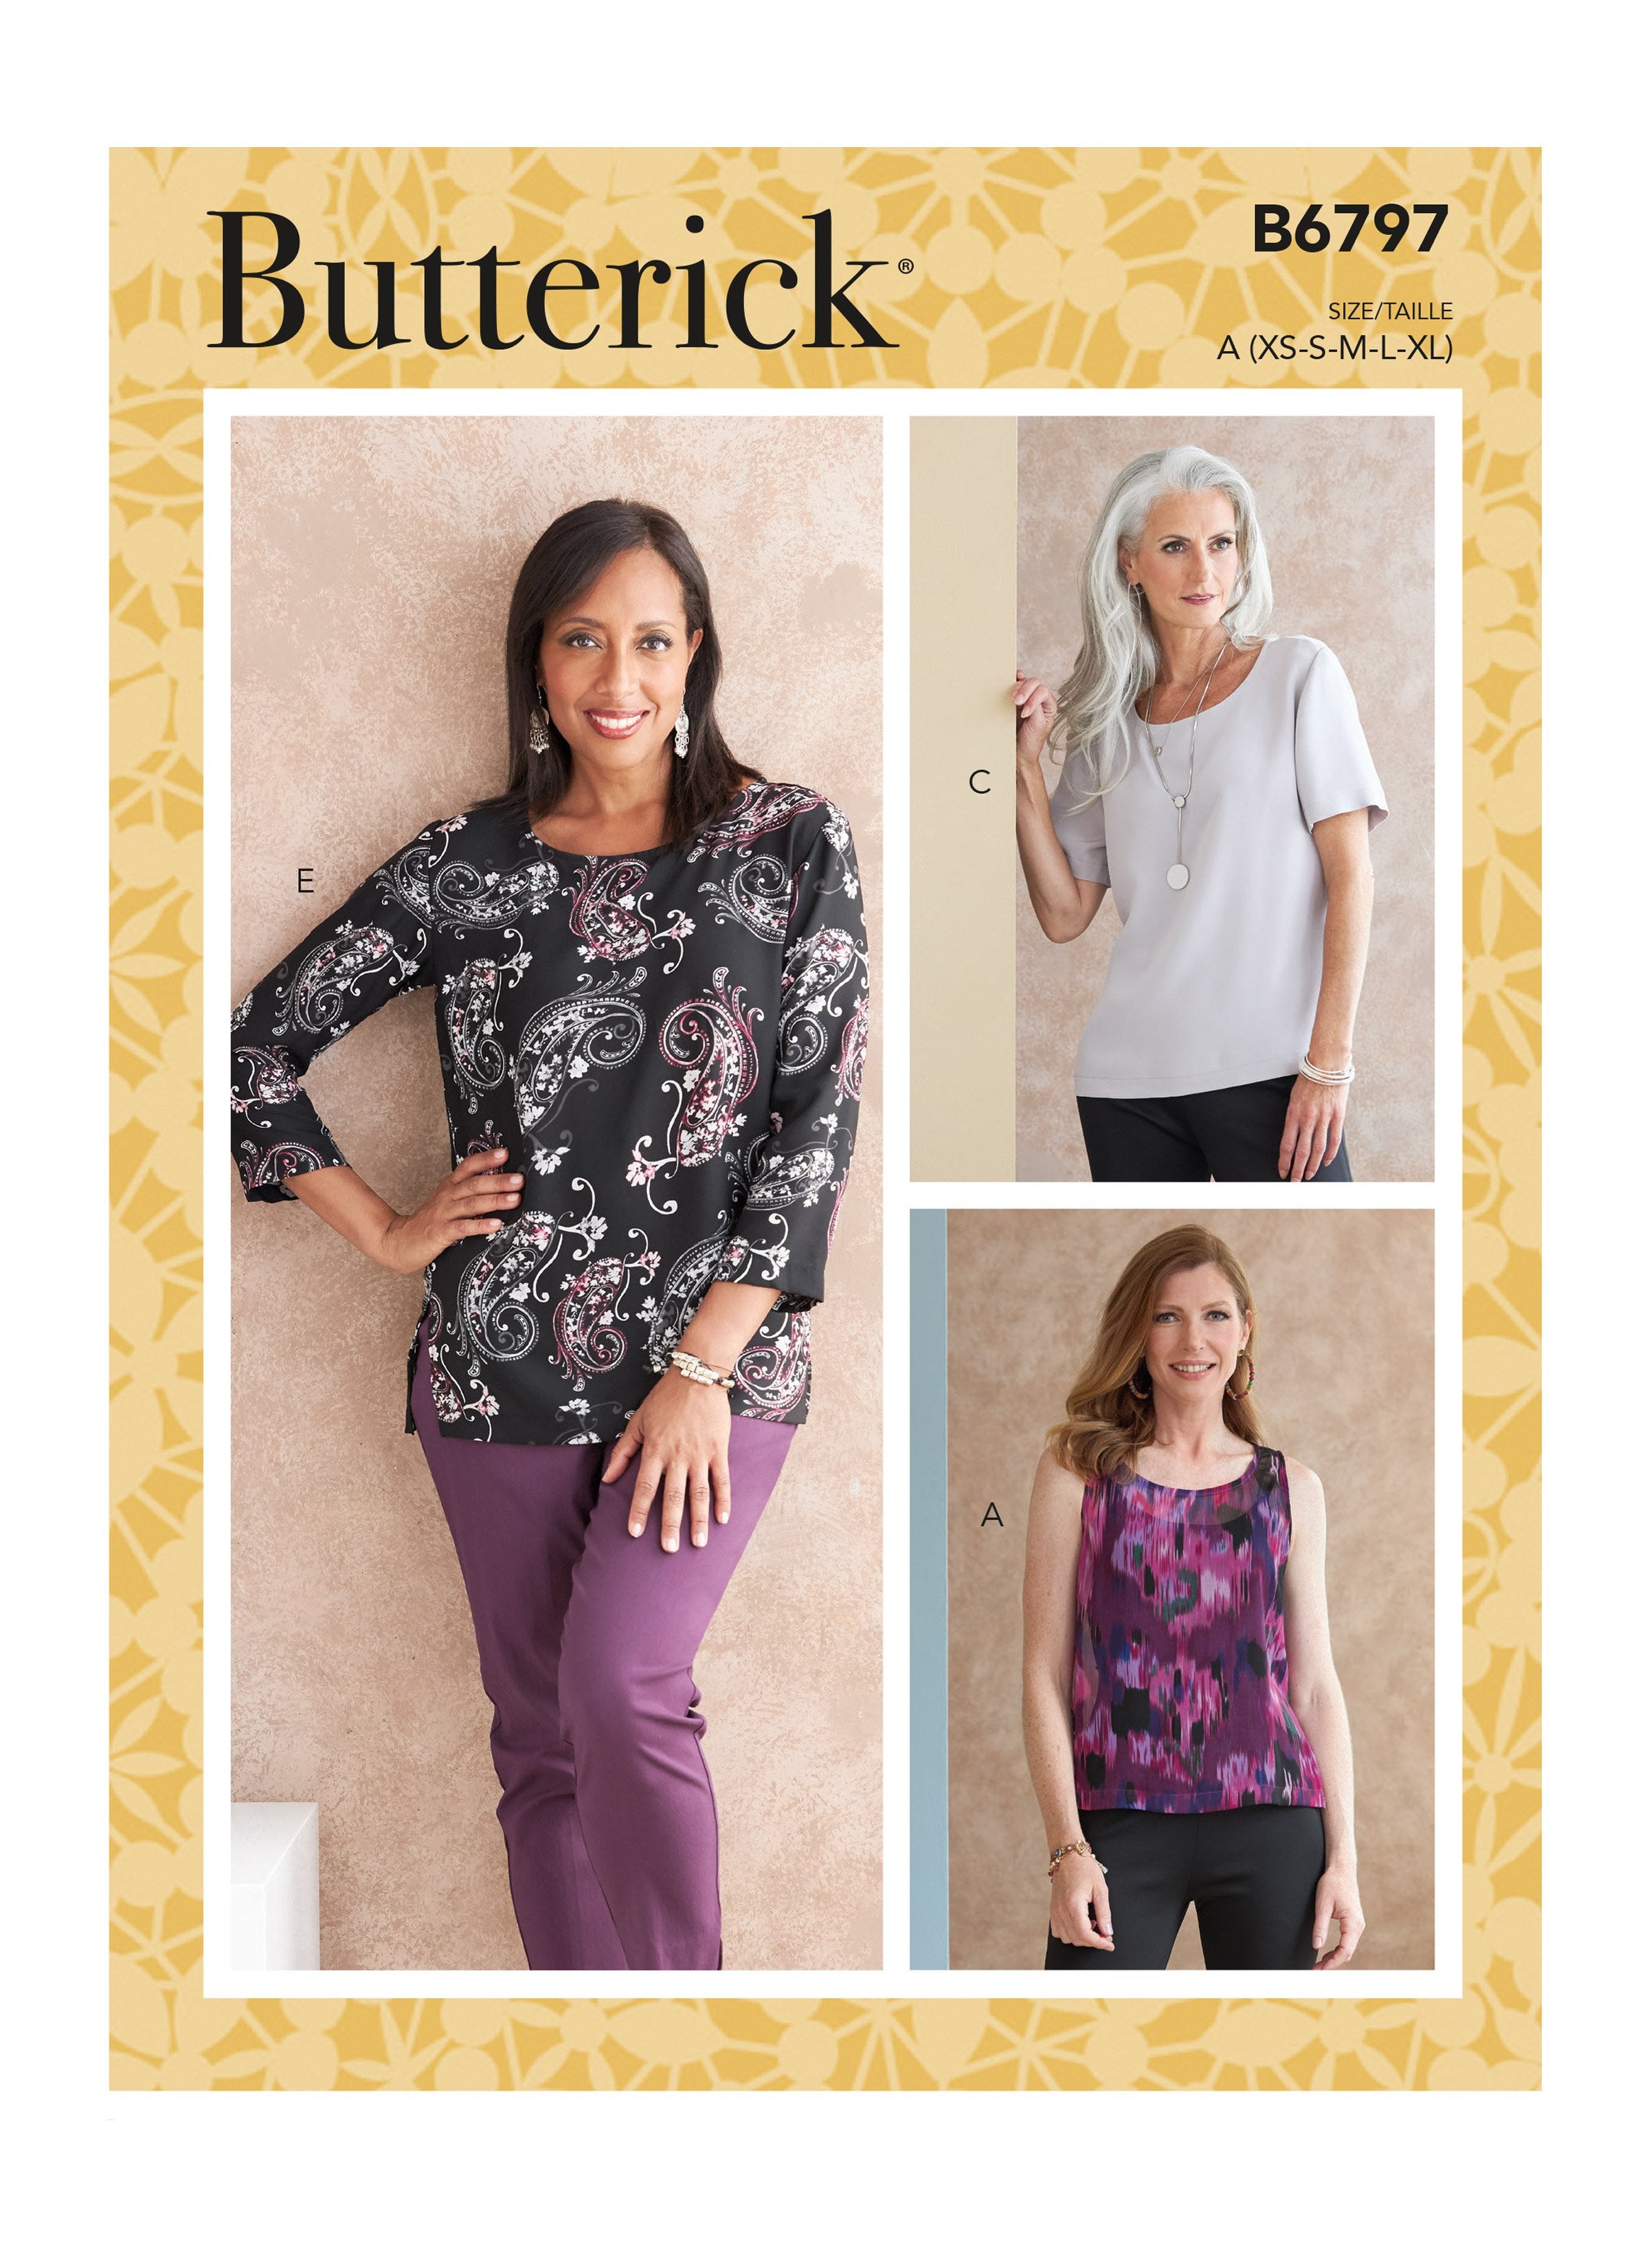 Butterick 6797 Misses' and Petite Scoop-neck Tops sewing pattern from Jaycotts Sewing Supplies